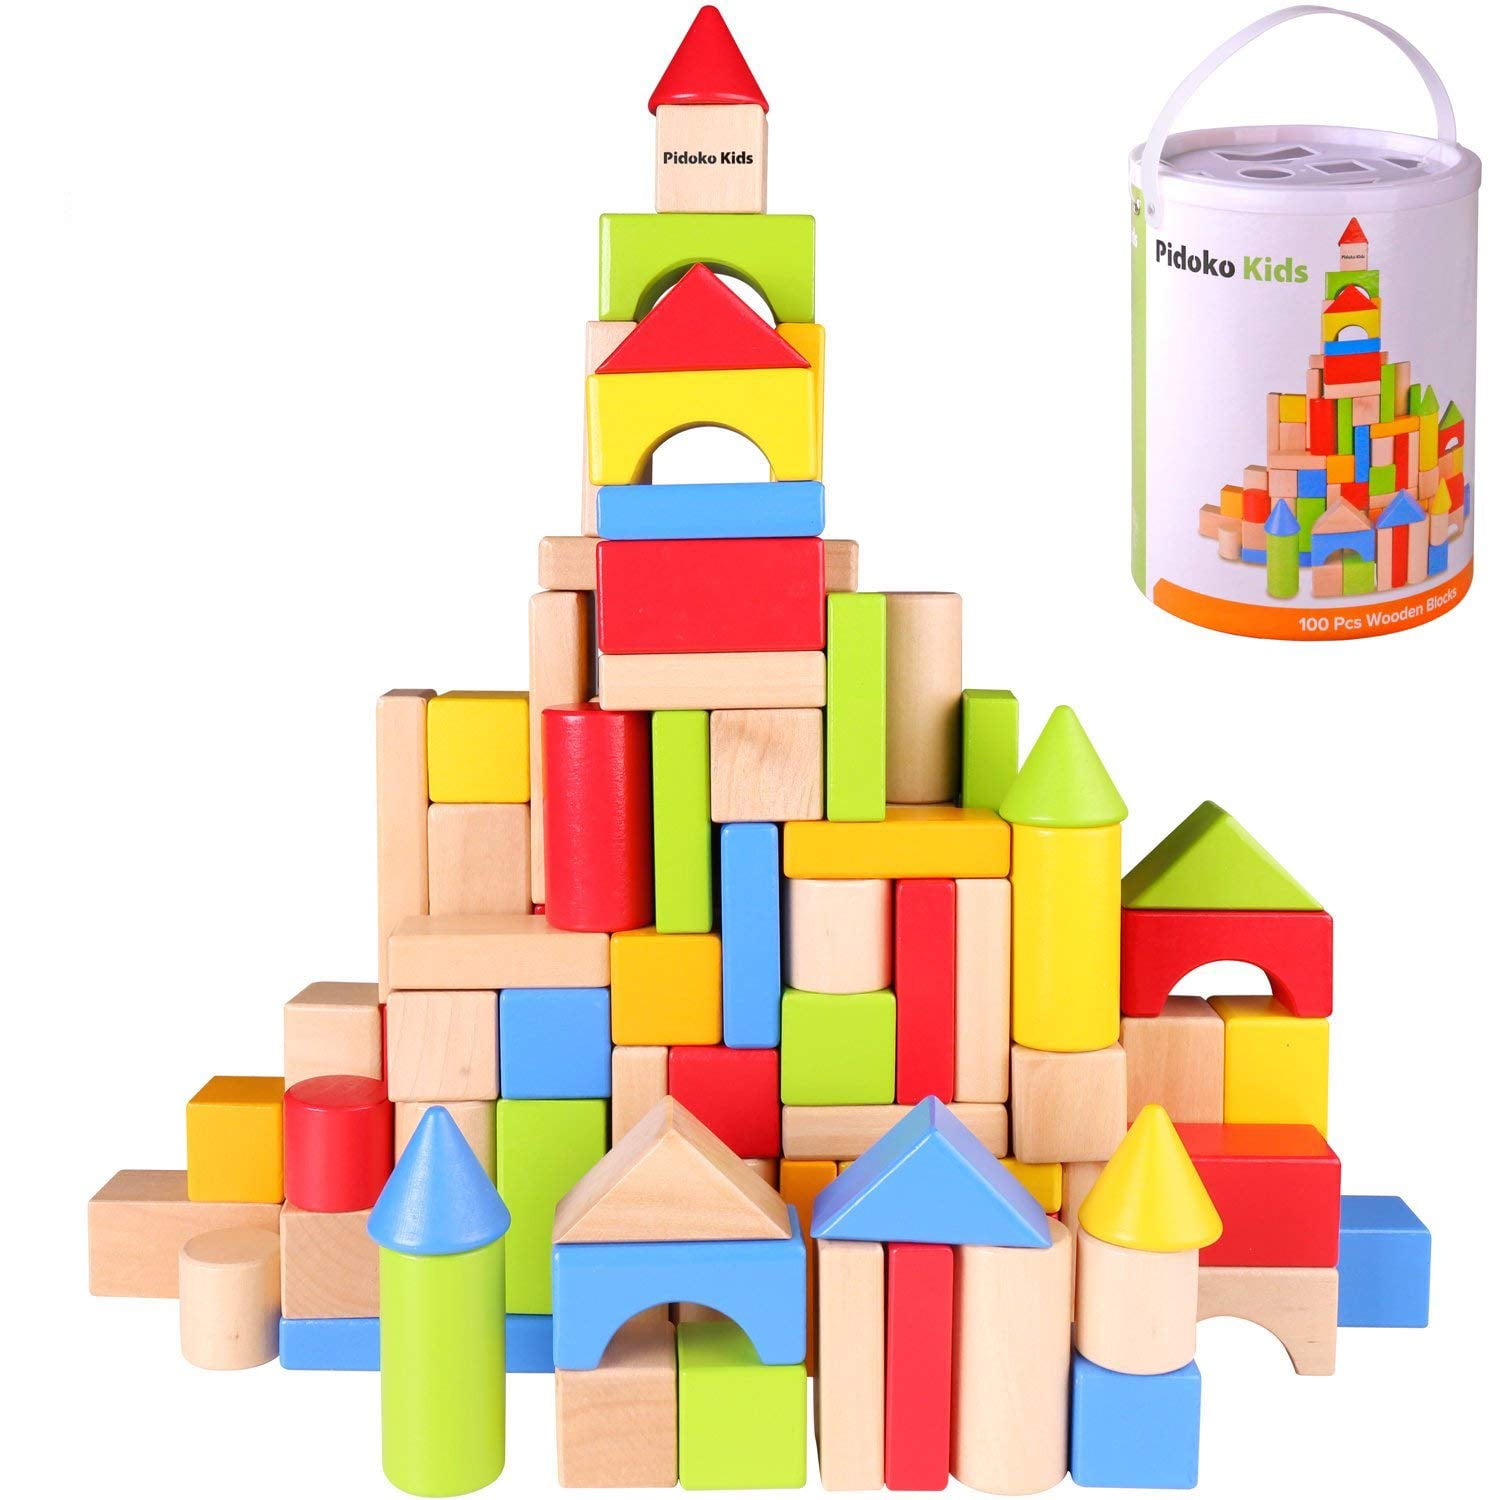 Montessori Solid Wood Large Building Block Set for Babies Toddlers 100 pieces! 